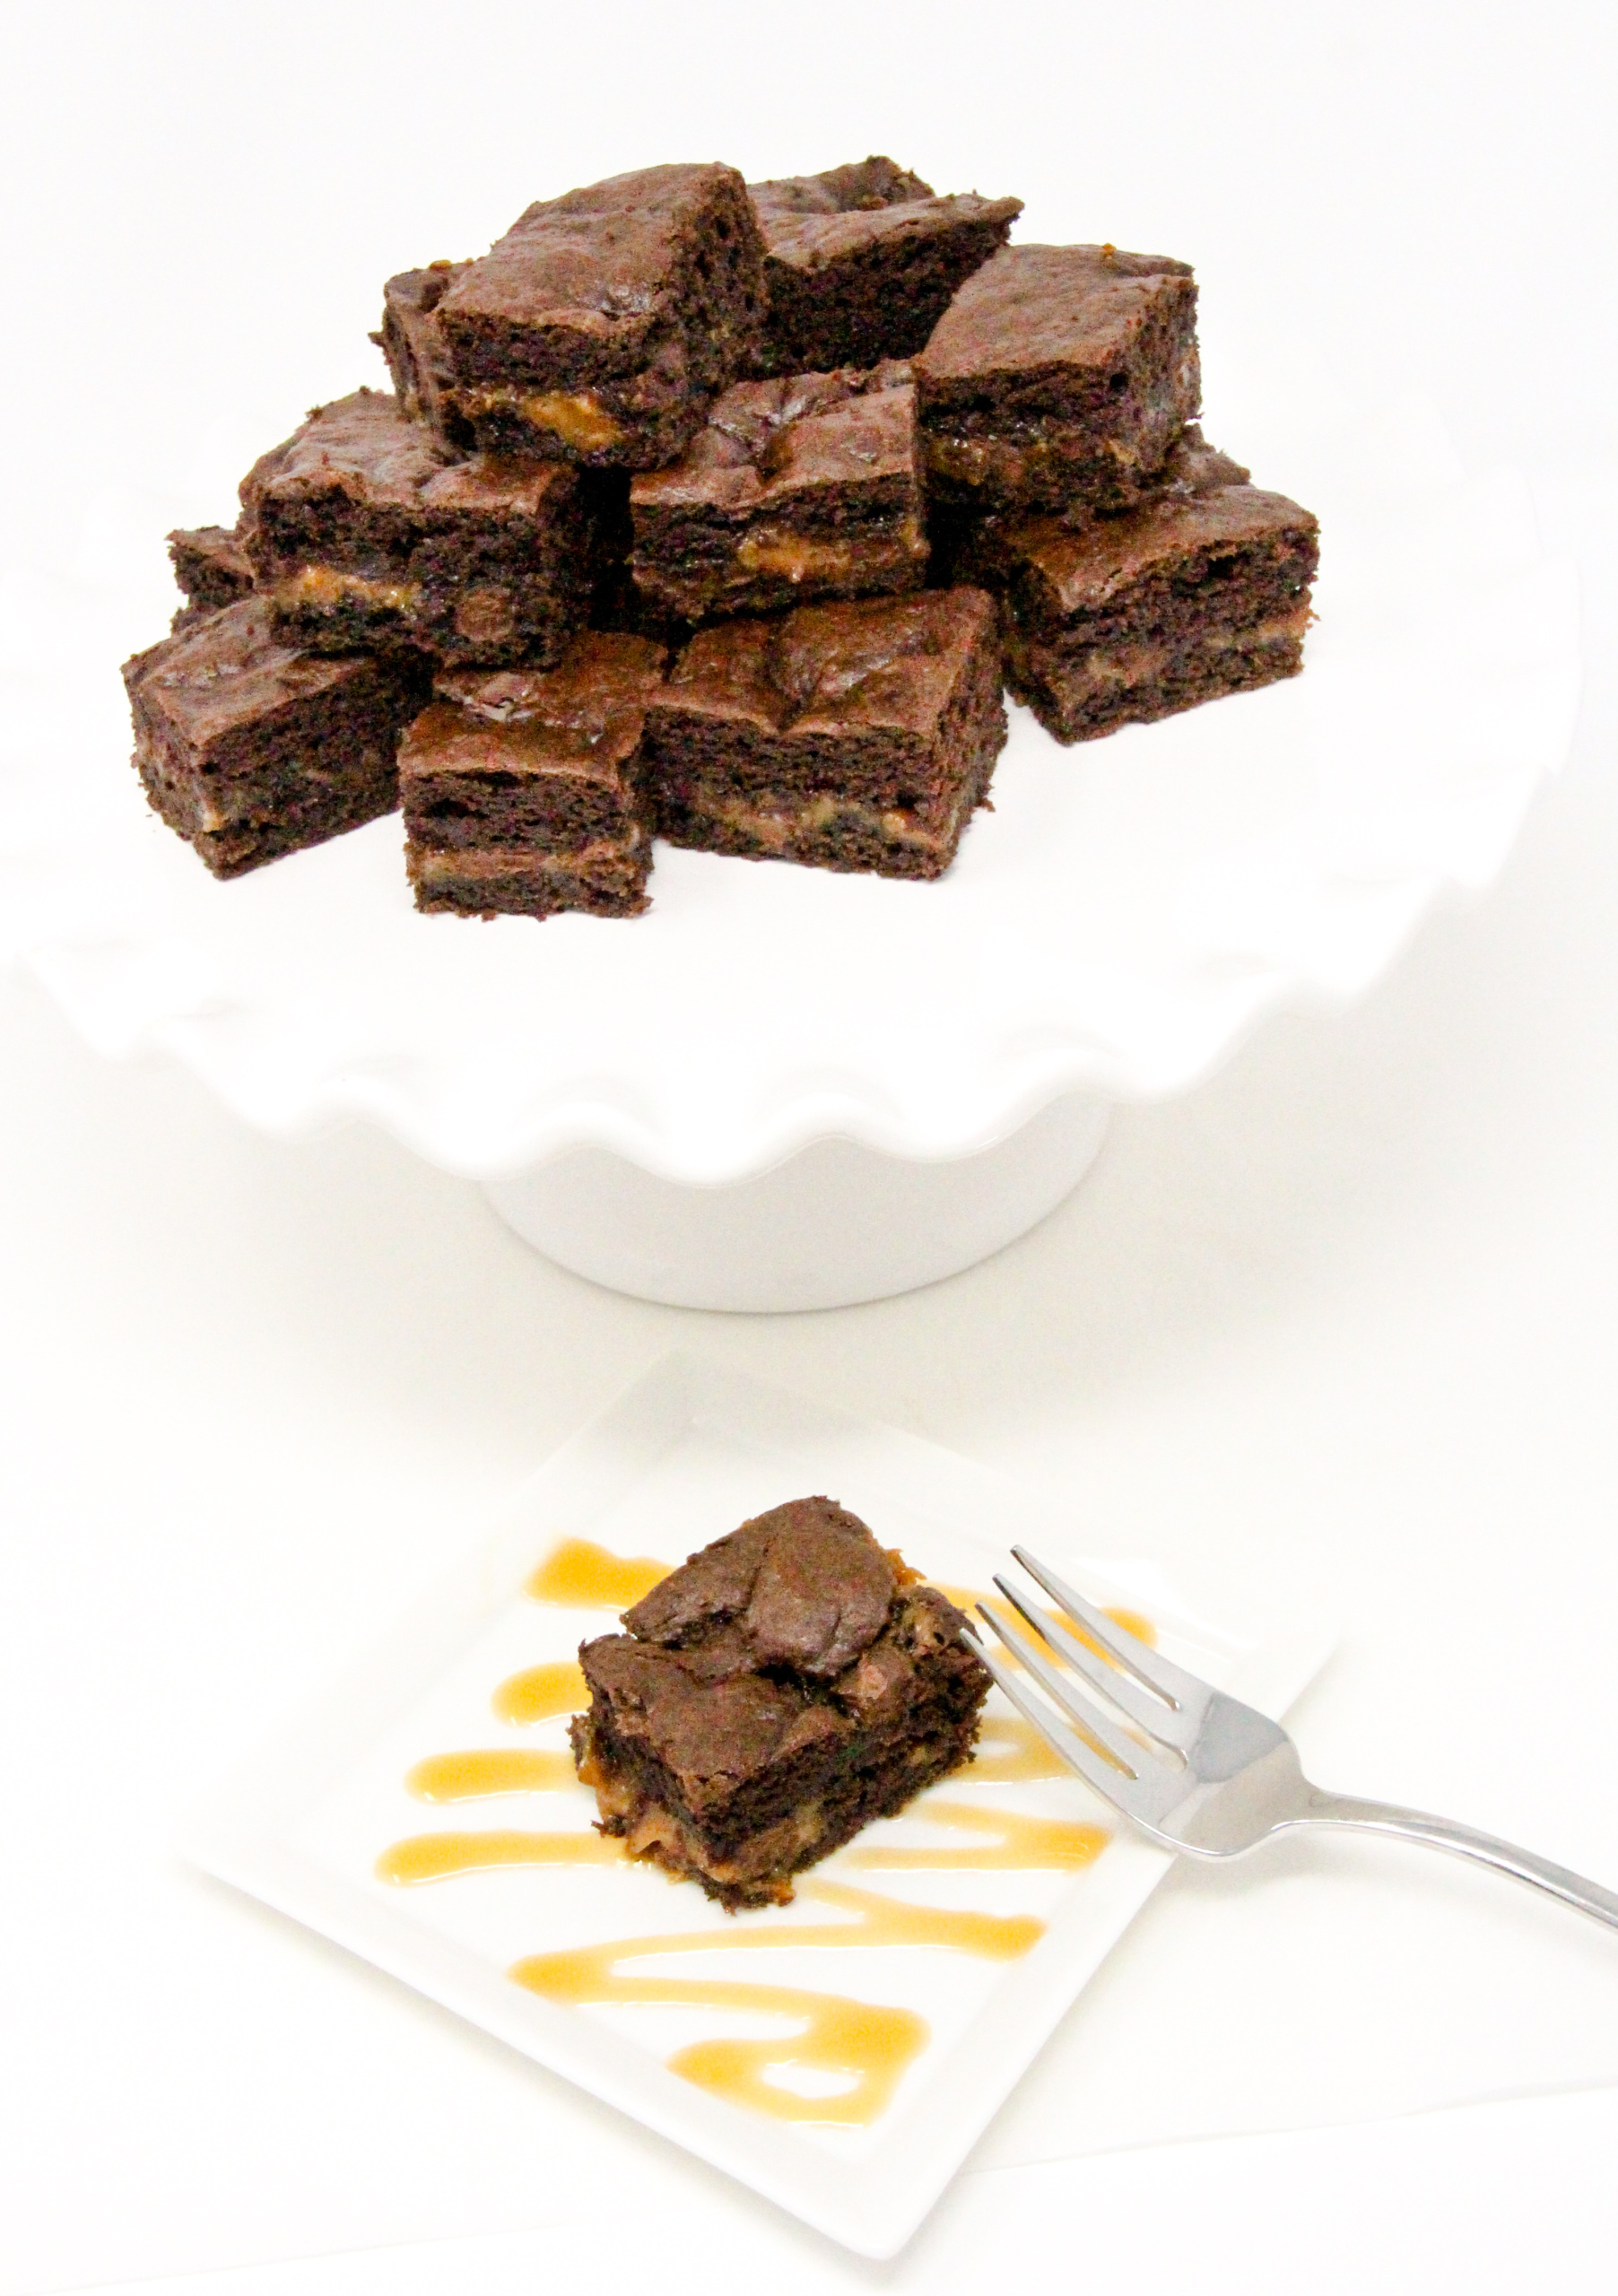 Double-Chocolate Caramel Brownies are the perfect combination of rich chocolaty goodness combined with creamy caramel that elevates these to pure deliciousness. And starting with a boxed cake mix, these are a cinch to make. Recipe shared with permission granted by Daryl Wood Gerber, author of A FLICKER OF A DOUBT. 